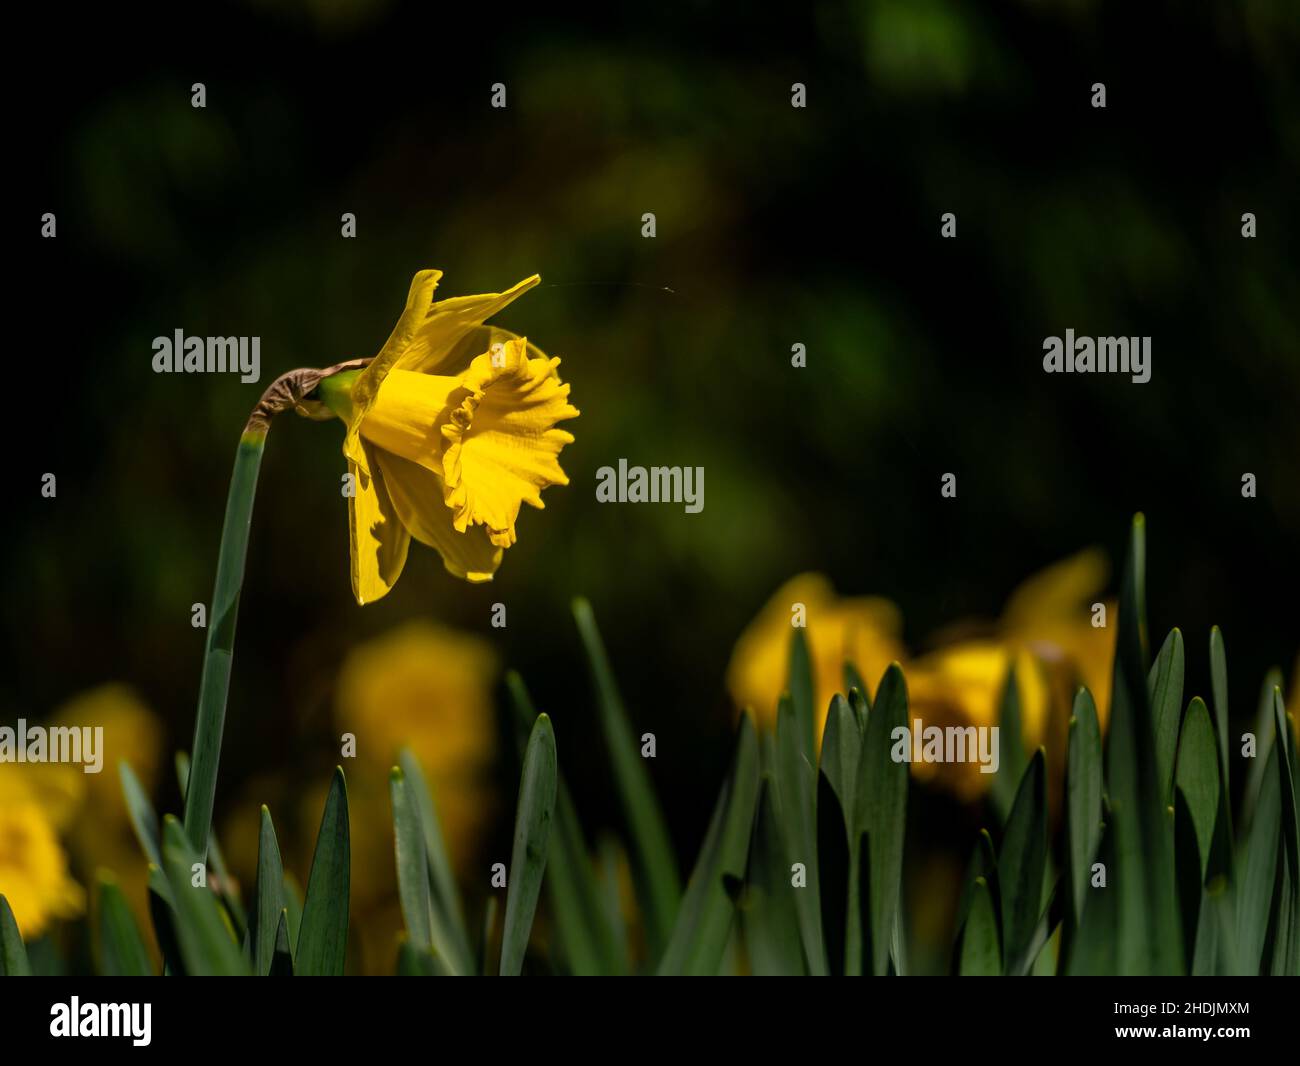 Yellow flower in front of green scenery Stock Photo